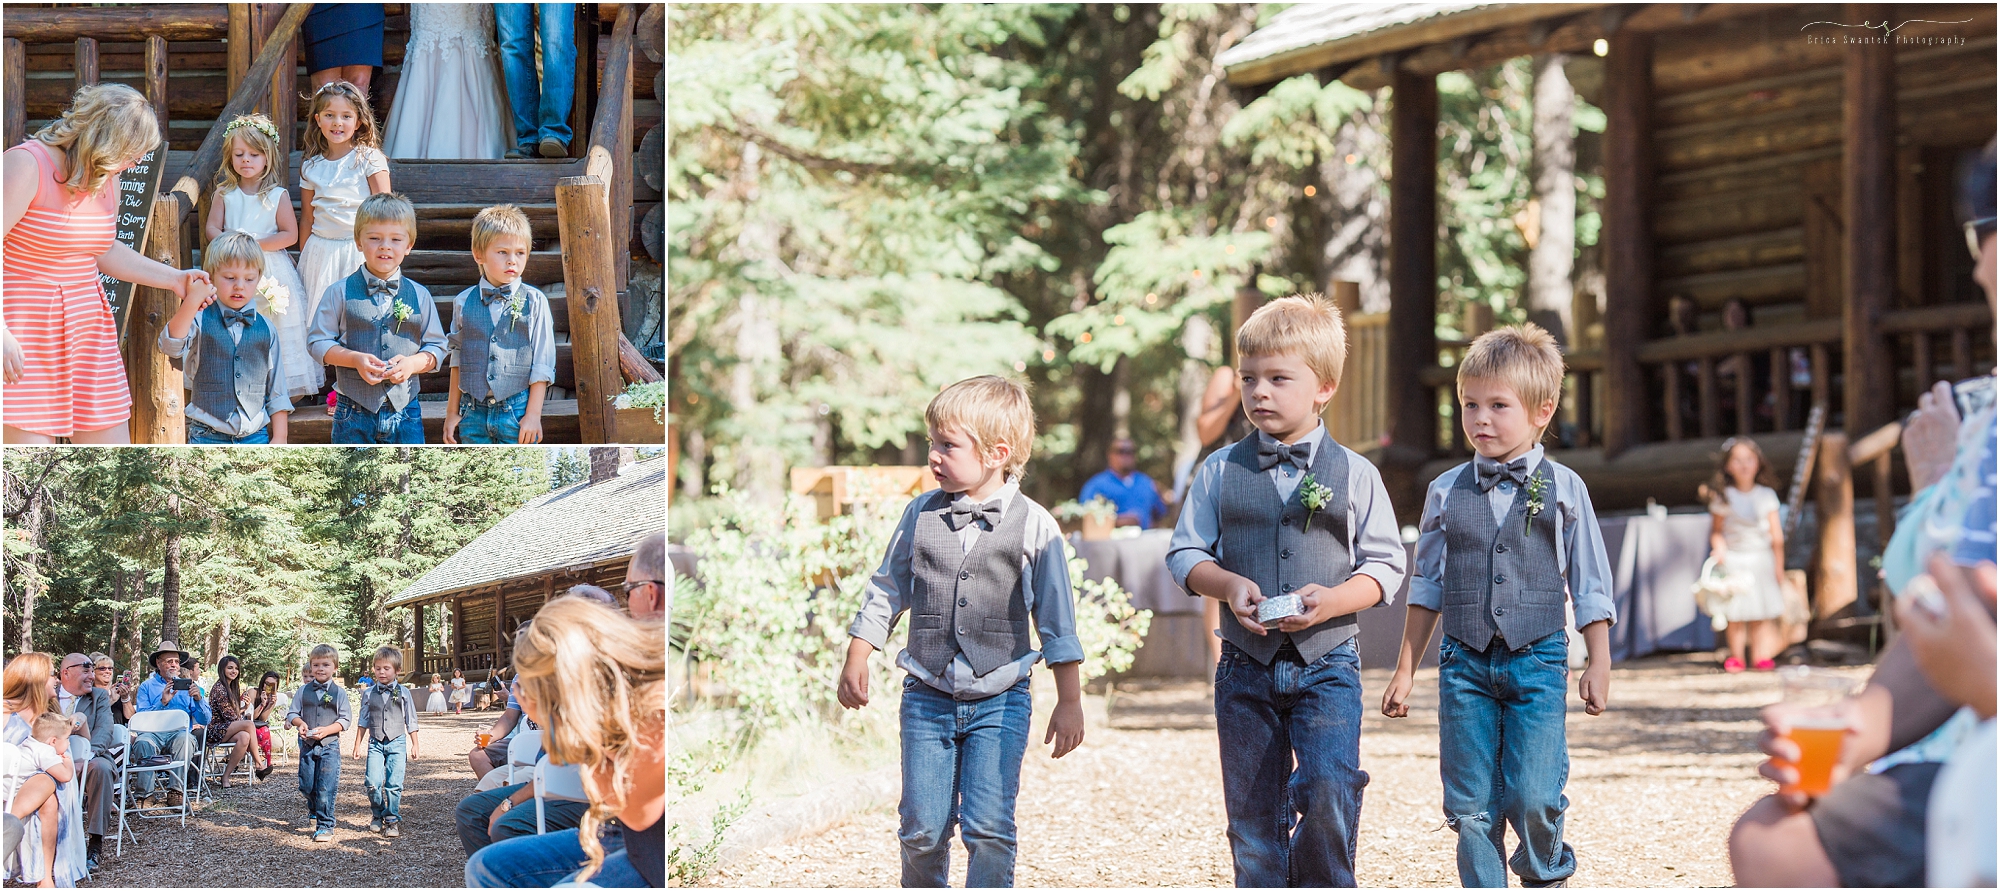 The ring-bearers walking down the aisle at this rustic Oregon lodge wedding in Bend. 